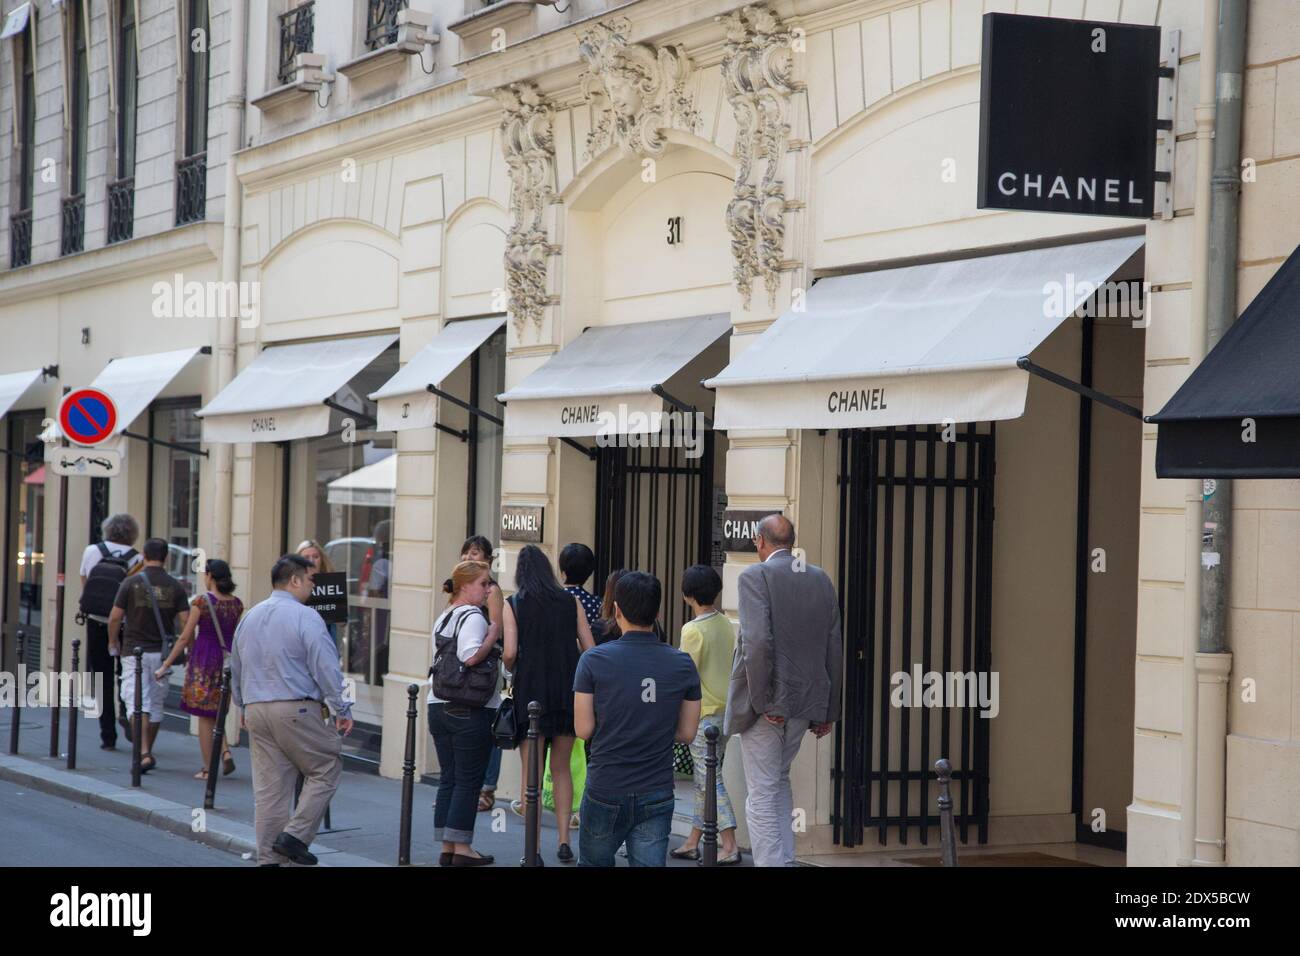 Outside view of Chanel, rue Cambon in Paris, France. July 25, 2014